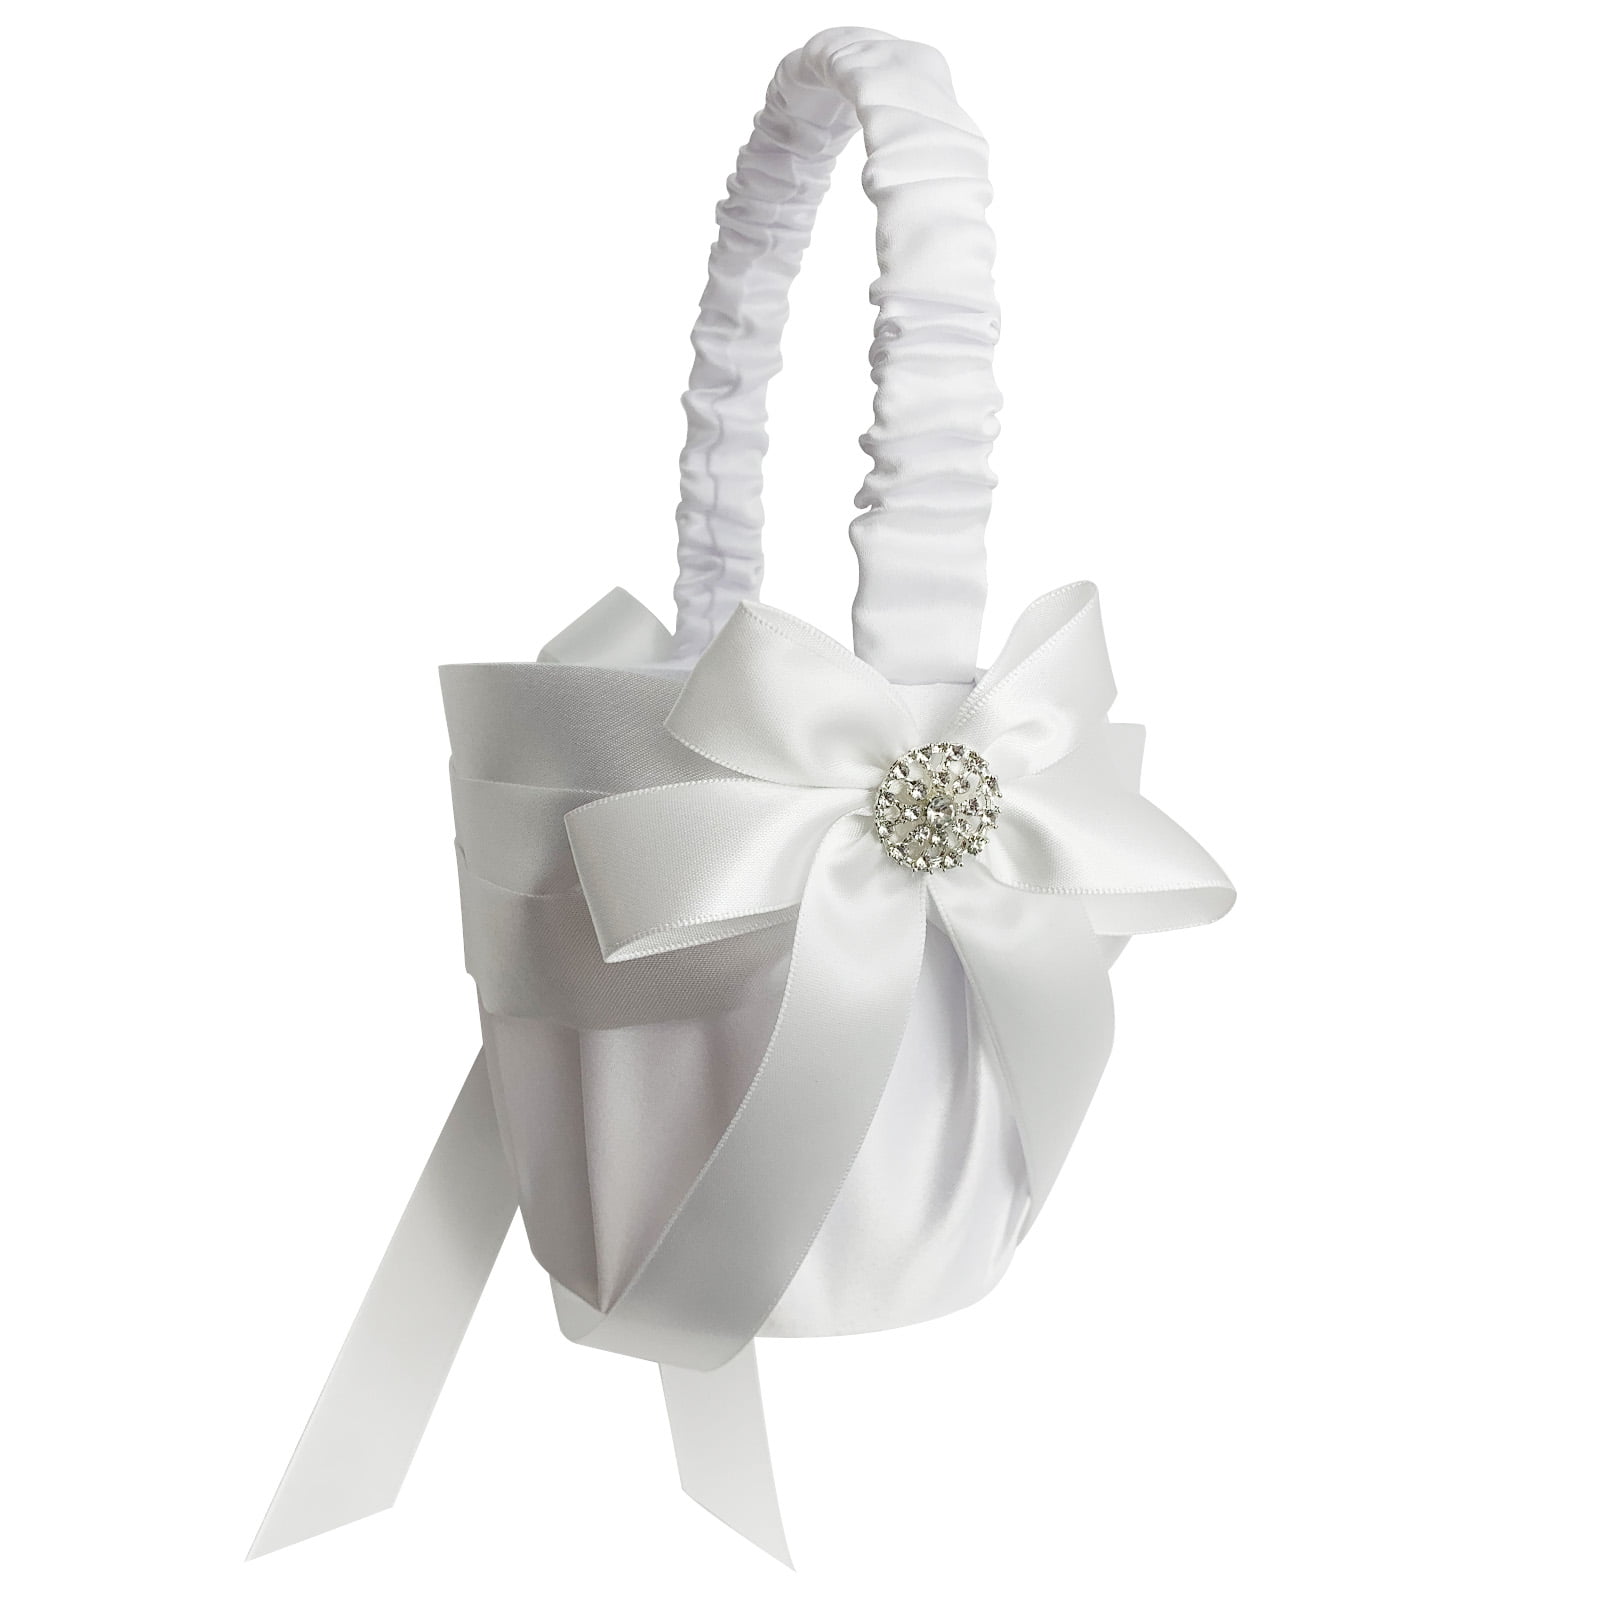 Wedding Flower Basket Ceremony Party Decor Petyoung Romantic Wedding Flower Girl Basket with Bowknot White